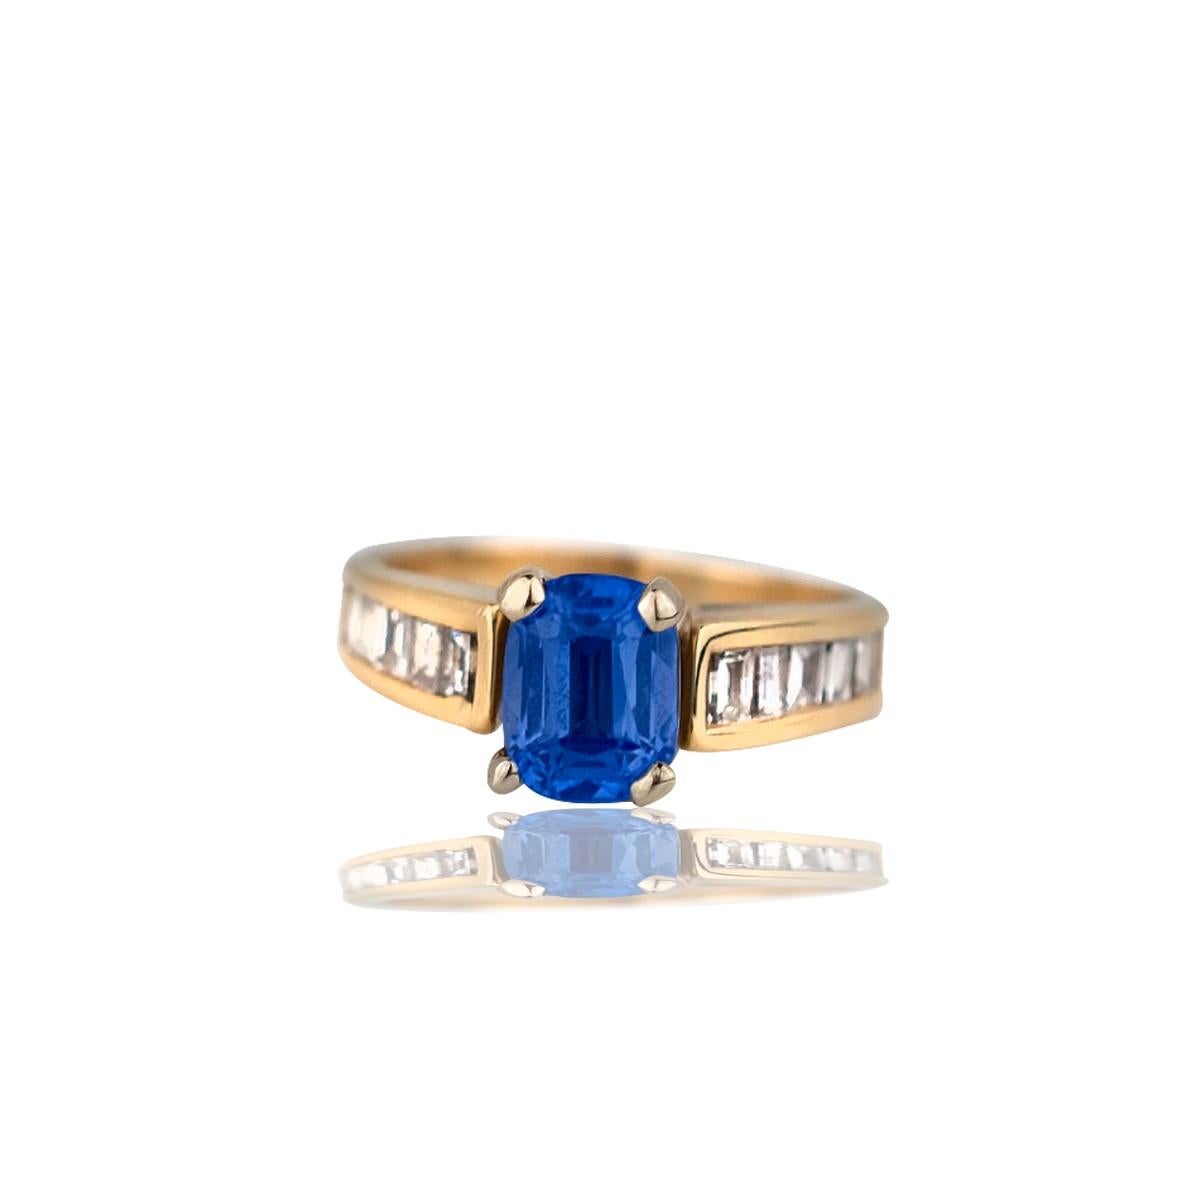 Emerald Cut 14k Tanzanite and Baguette Diamond Ring 1.40 Carat Total Weight For Sale